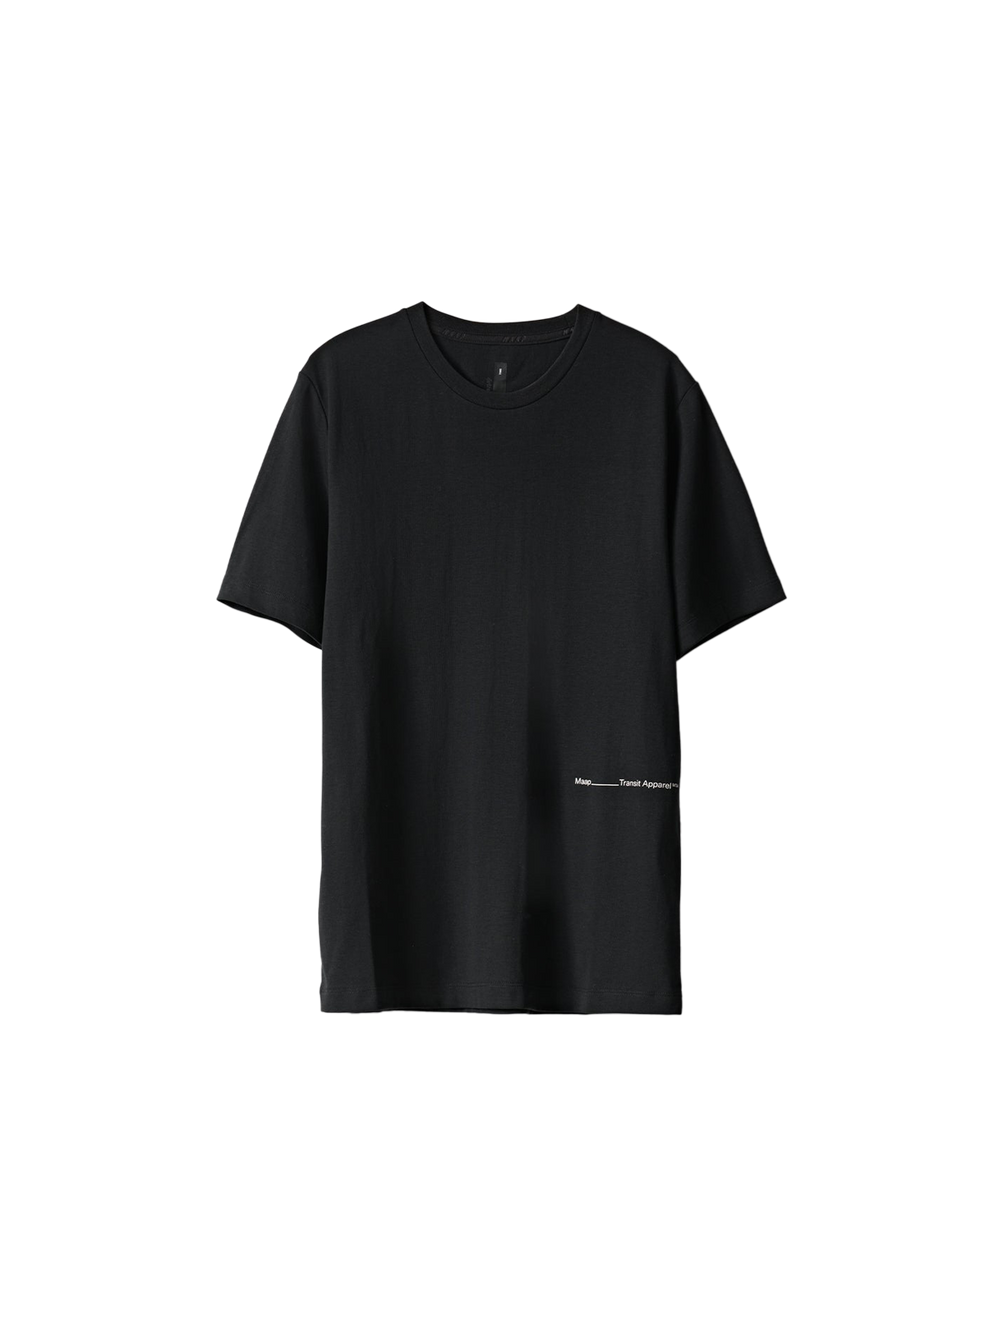 Product Image for Transit Tee